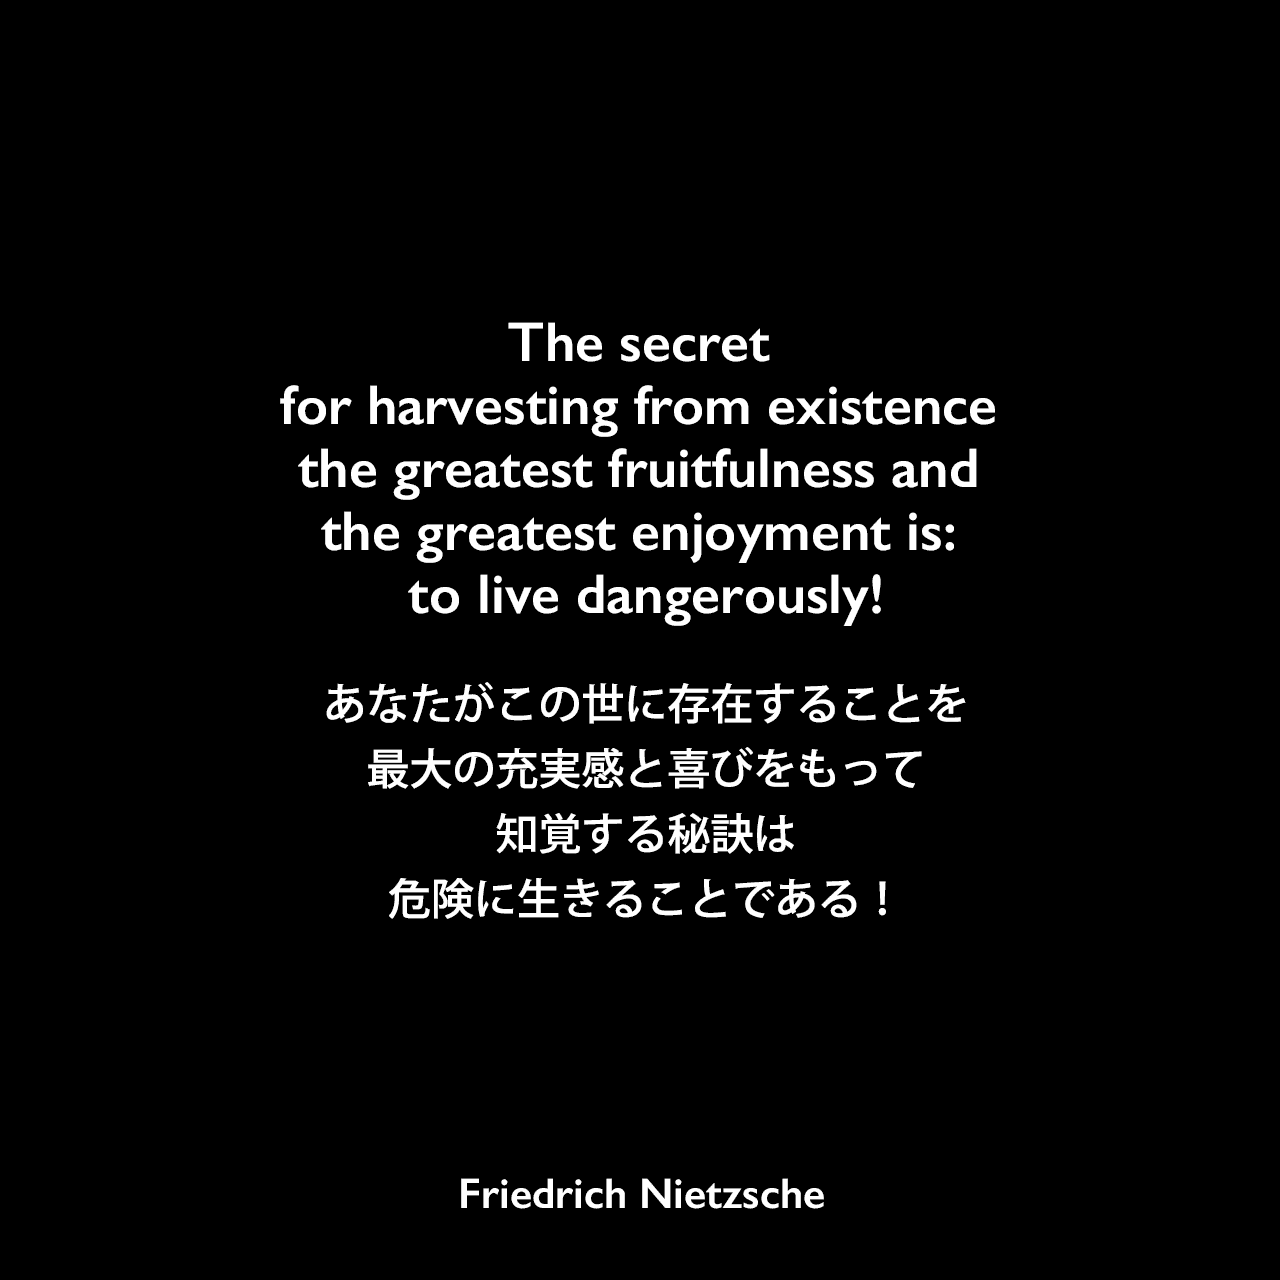 The secret for harvesting from existence the greatest fruitfulness and the greatest enjoyment is: to live dangerously!あなたがこの世に存在することを最大の充実感と喜びをもって知覚する秘訣は、危険に生きることである！Friedrich Nietzsche